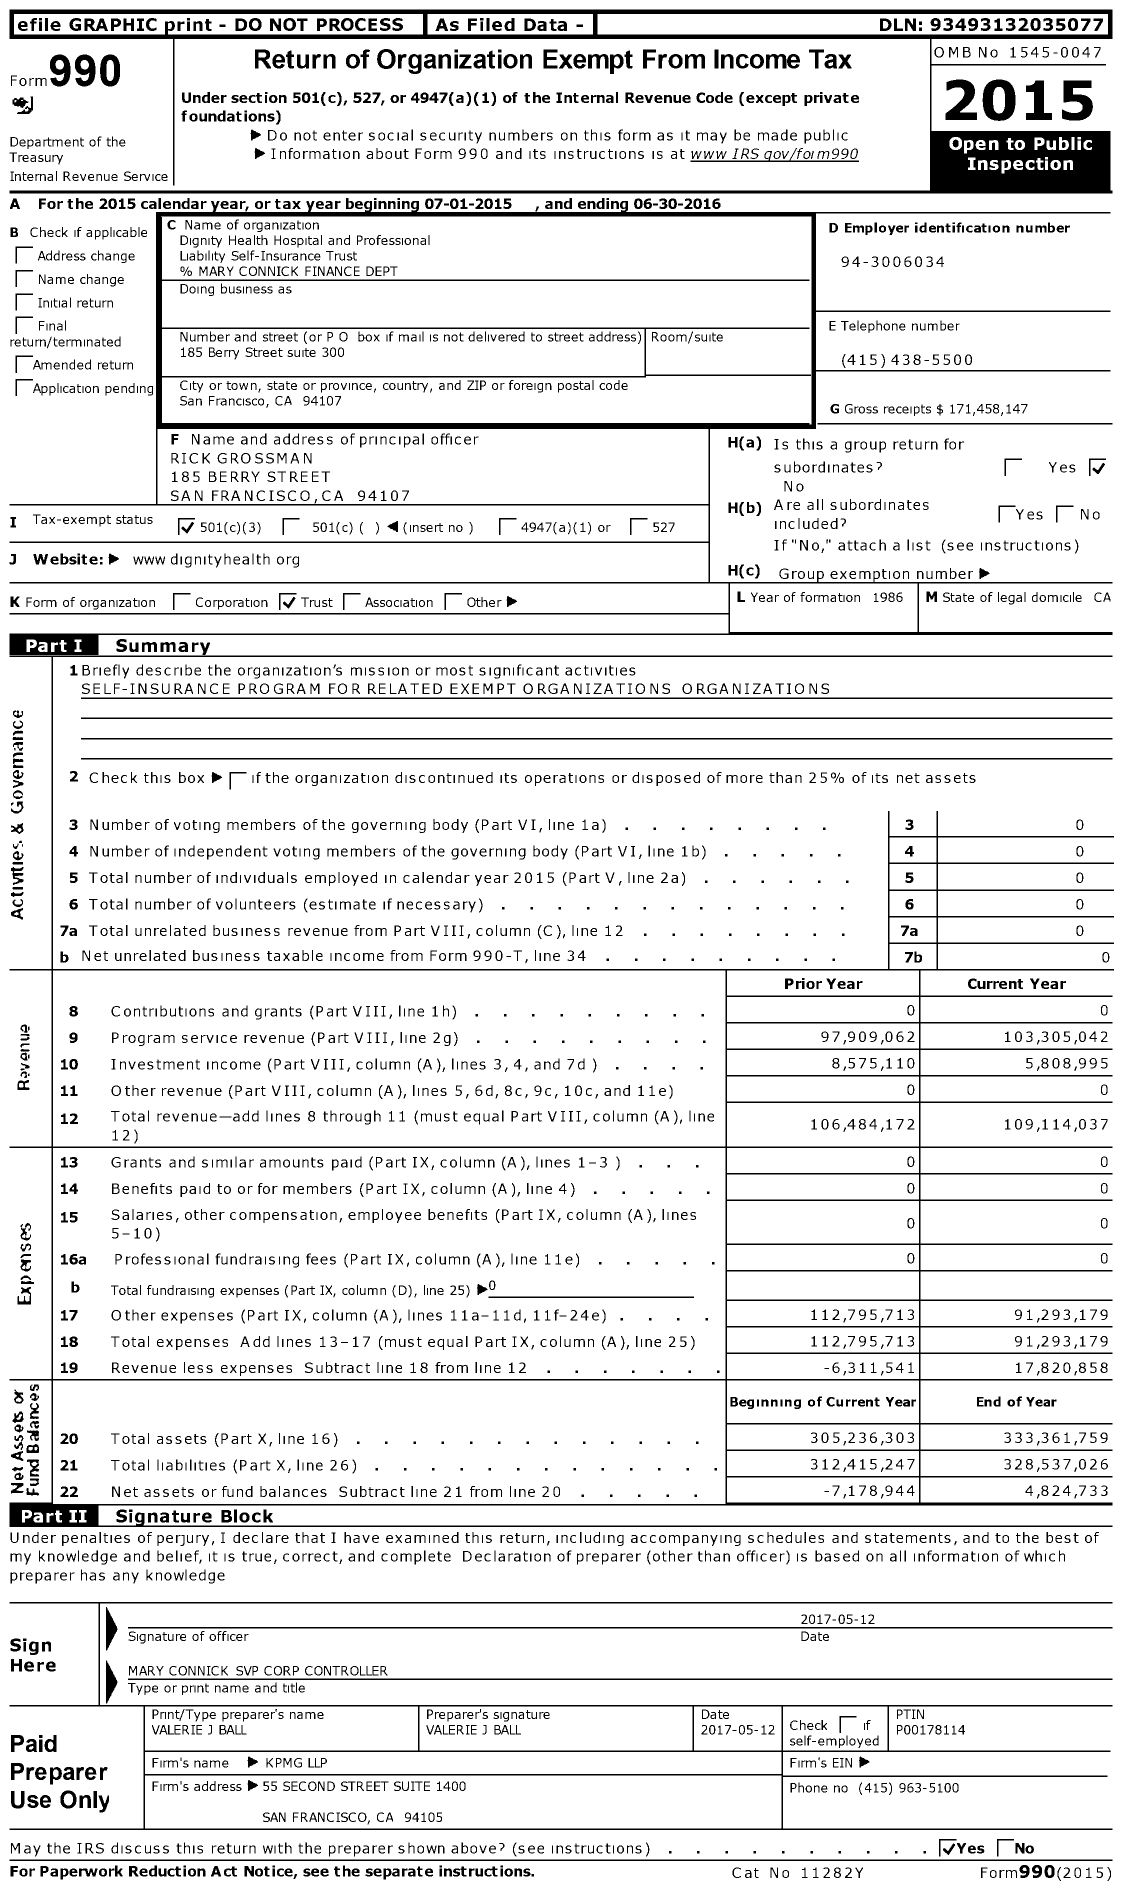 Image of first page of 2015 Form 990 for Dignity Health Hospital and Professional Liability Self-Insurance Trust